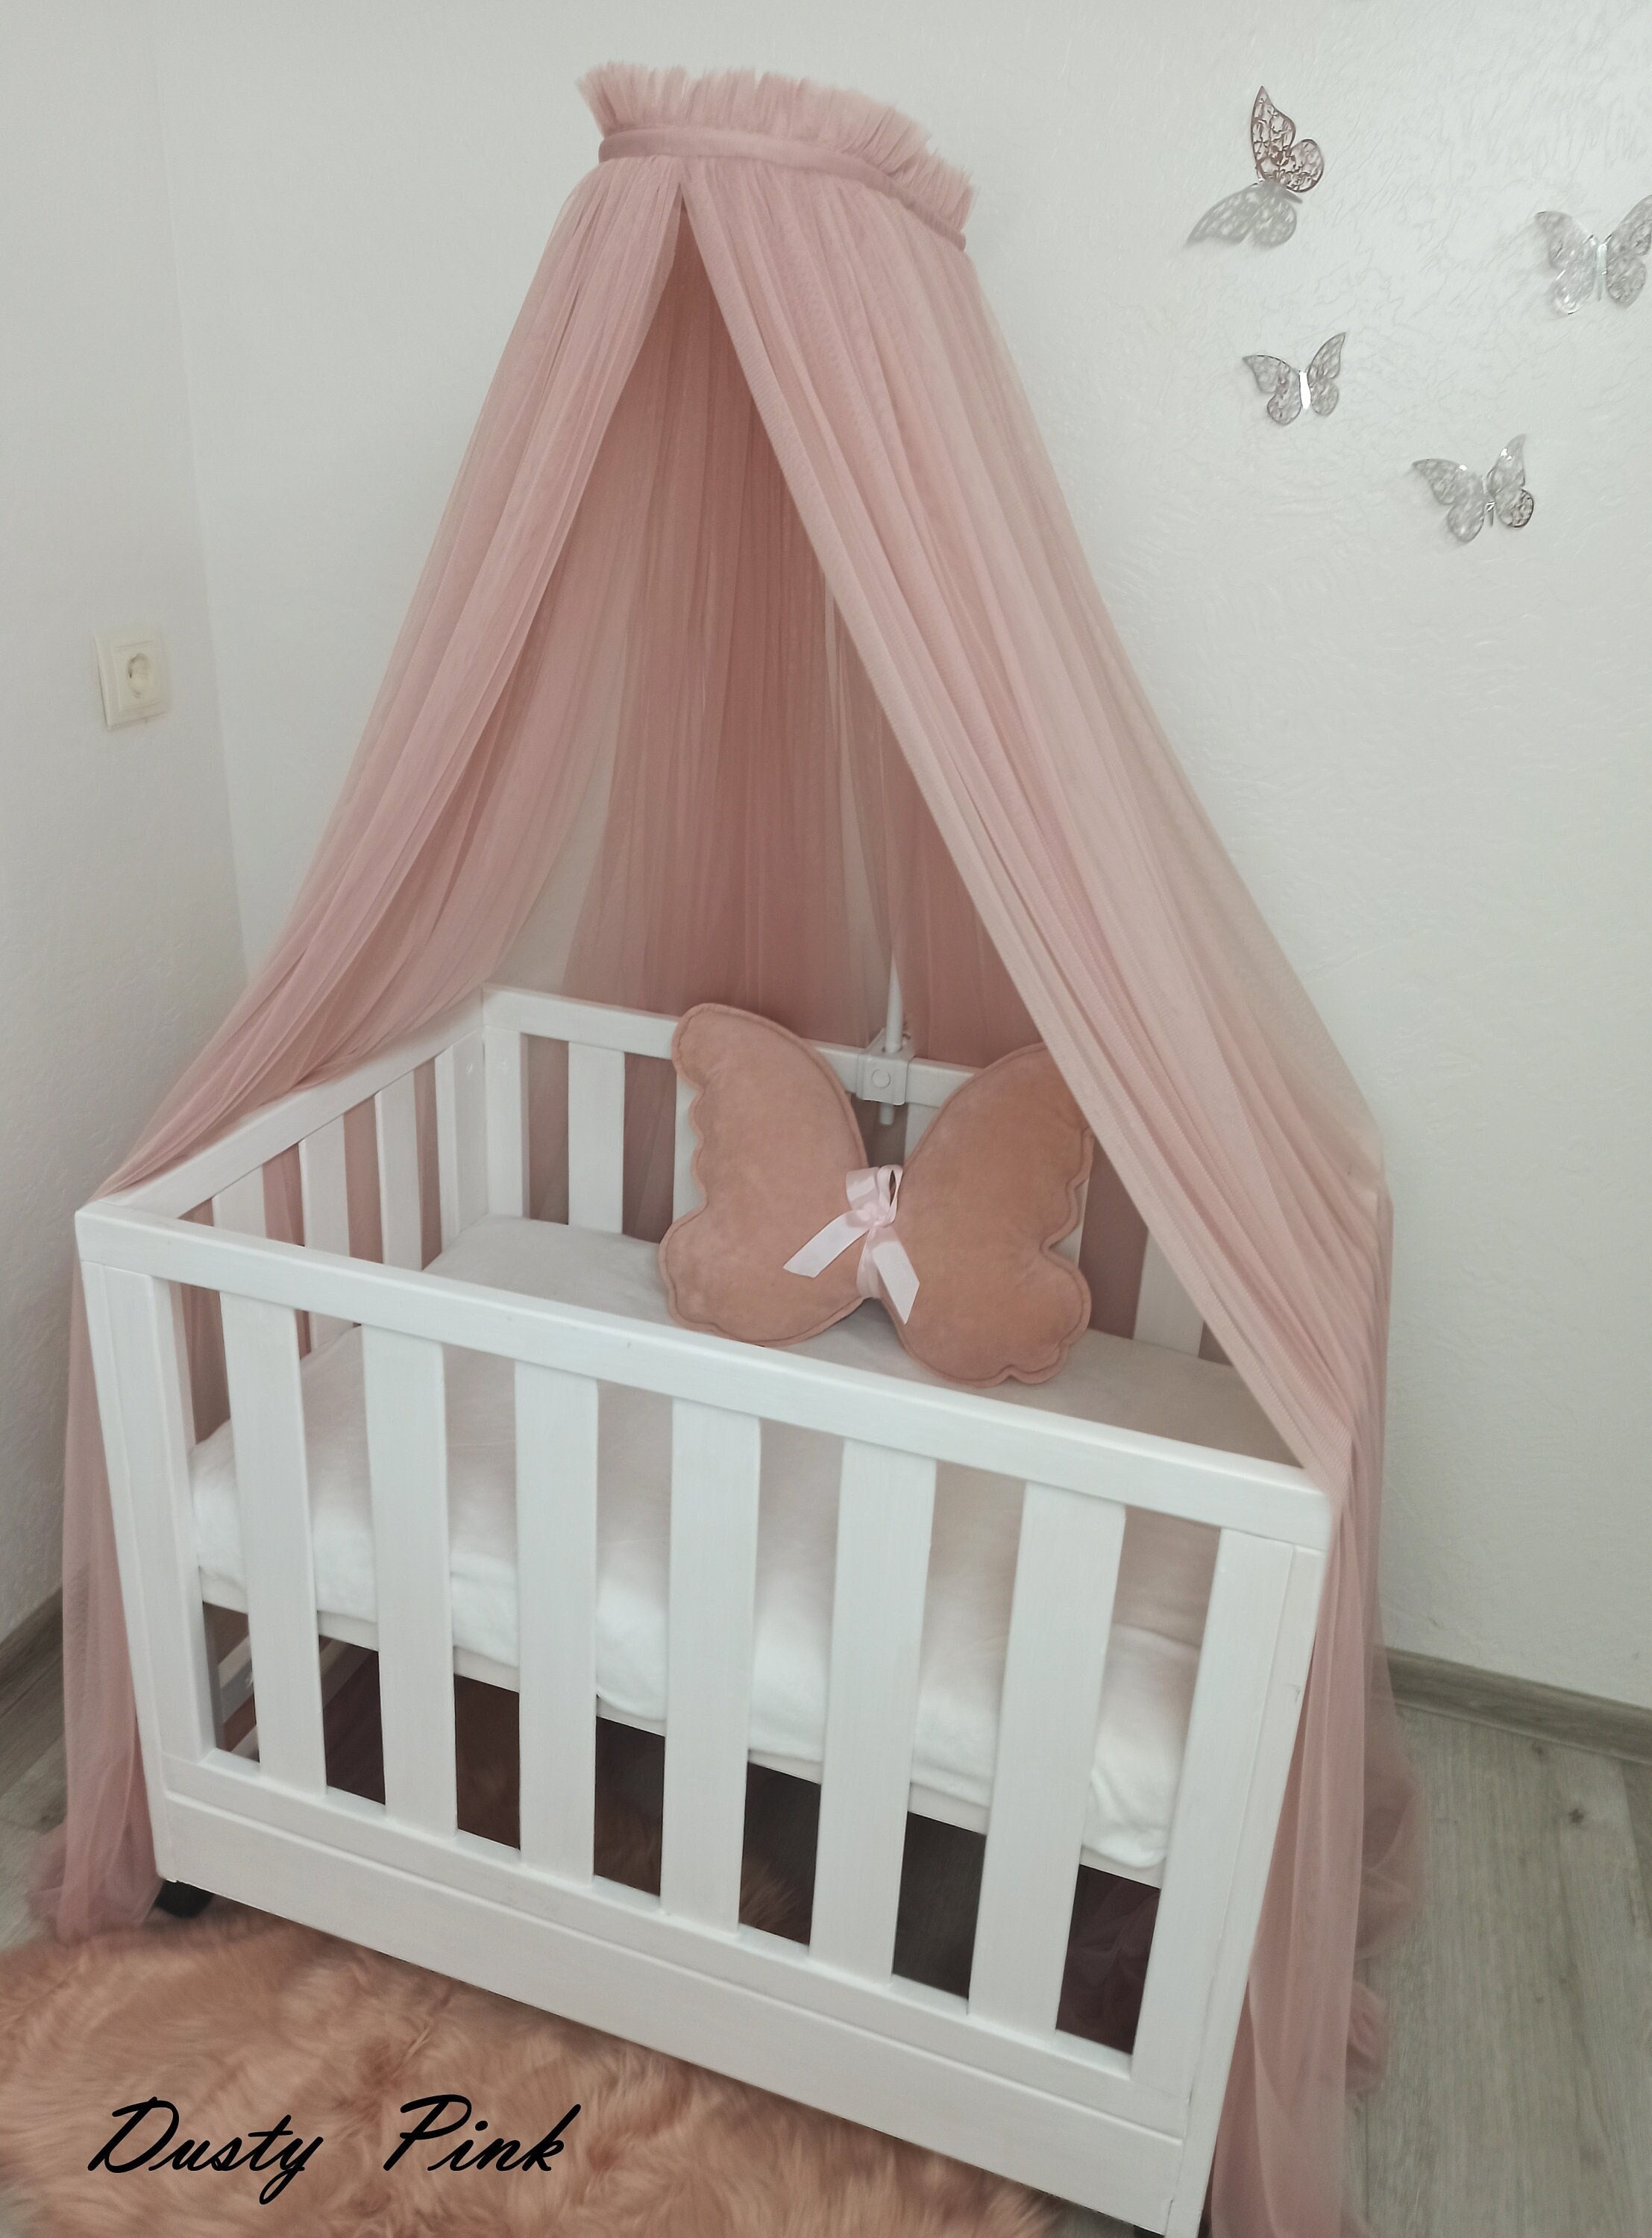 Crib Canopy for Nursery With Stand, Kids Hanging Tent for Nursery, Bed  Canopy, Nook Baldachin, Toddler Canopy With Pompoms 